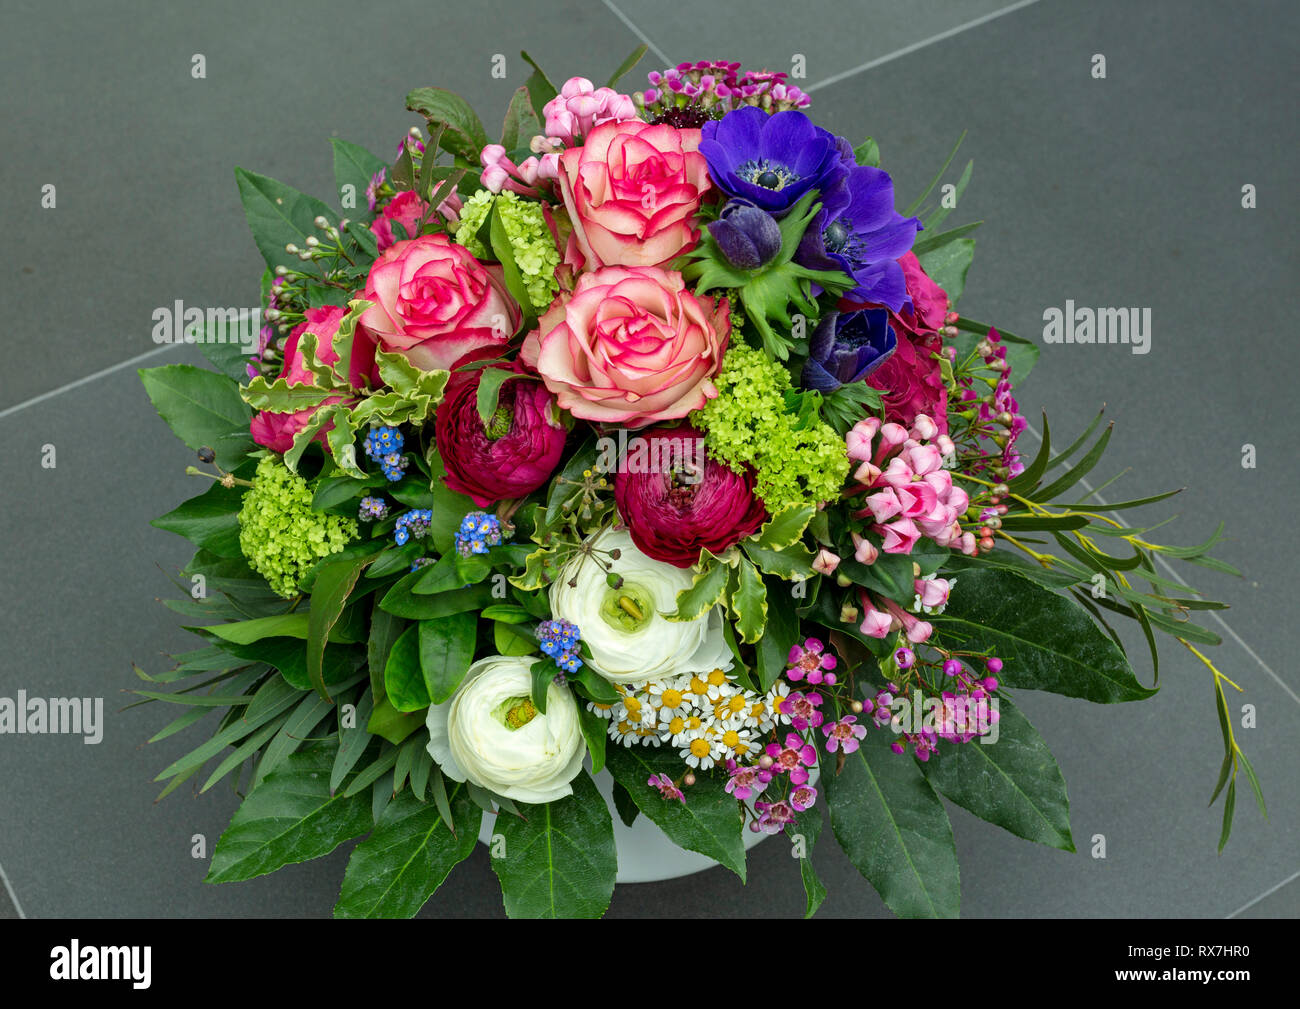 nature, plants, flowers, bunch of flowers, birthday bouquet, roses ...